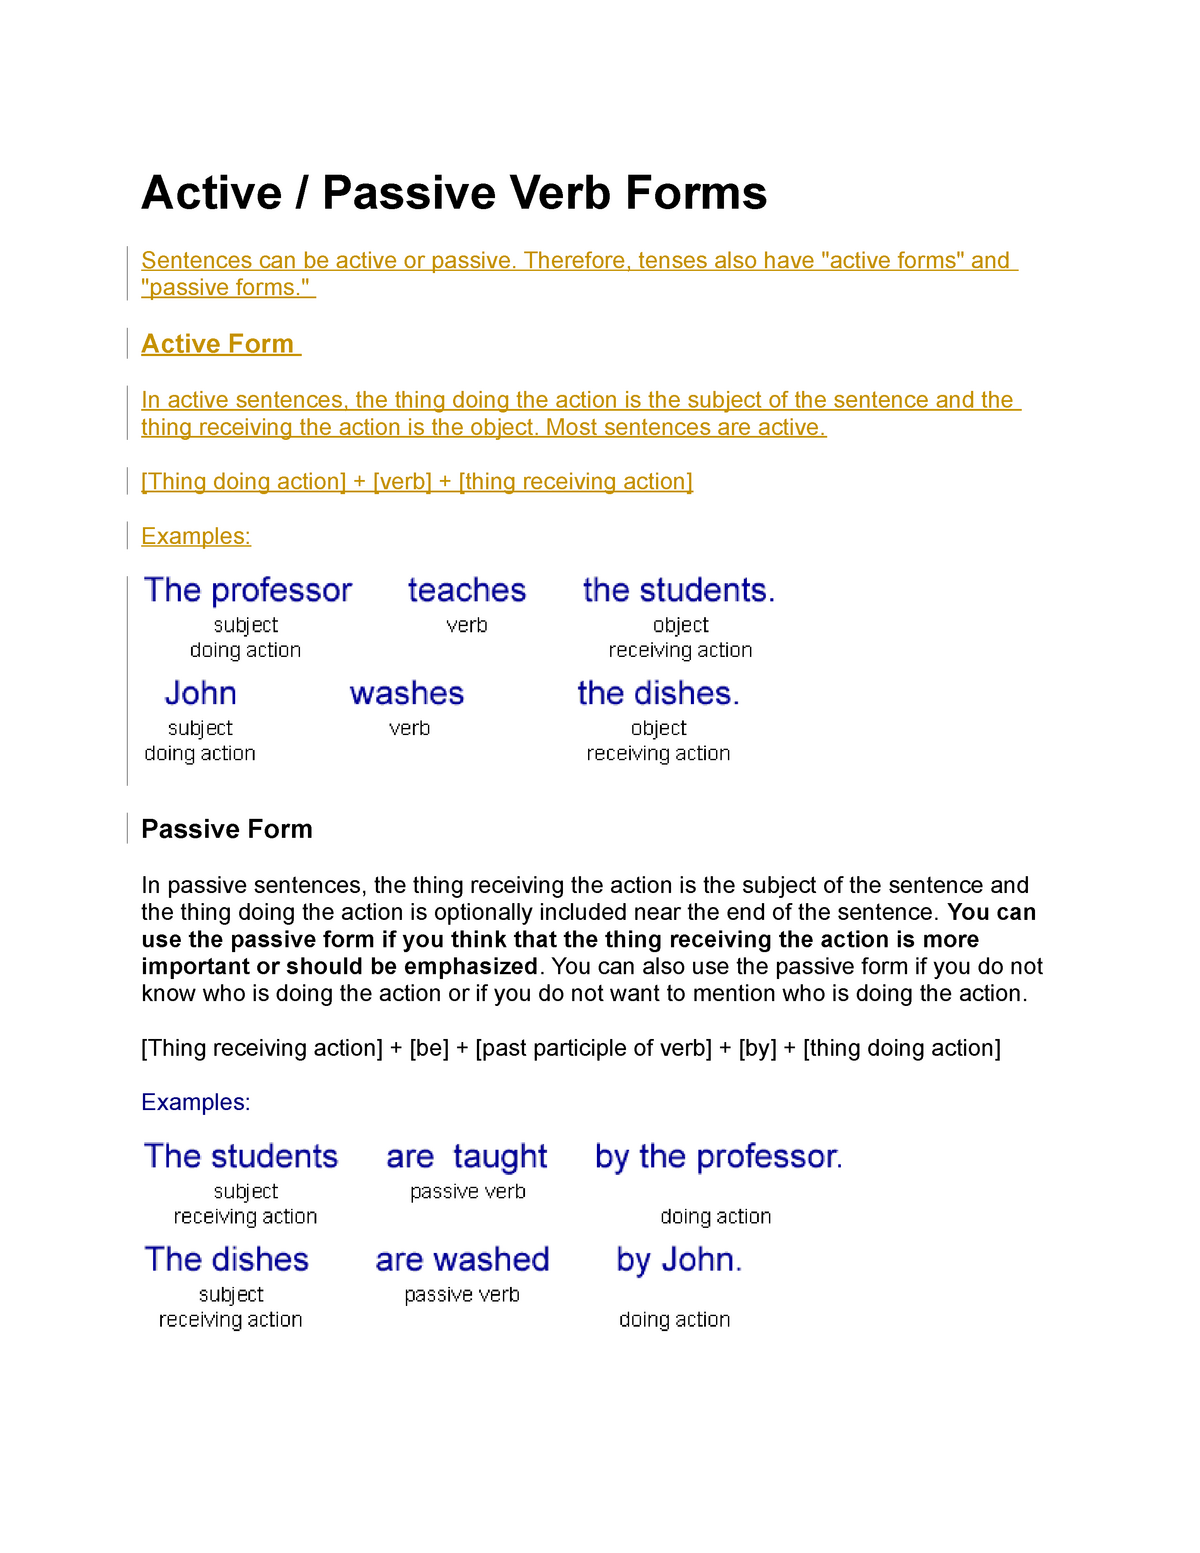 explanation-active-passive-verb-forms-studeersnel